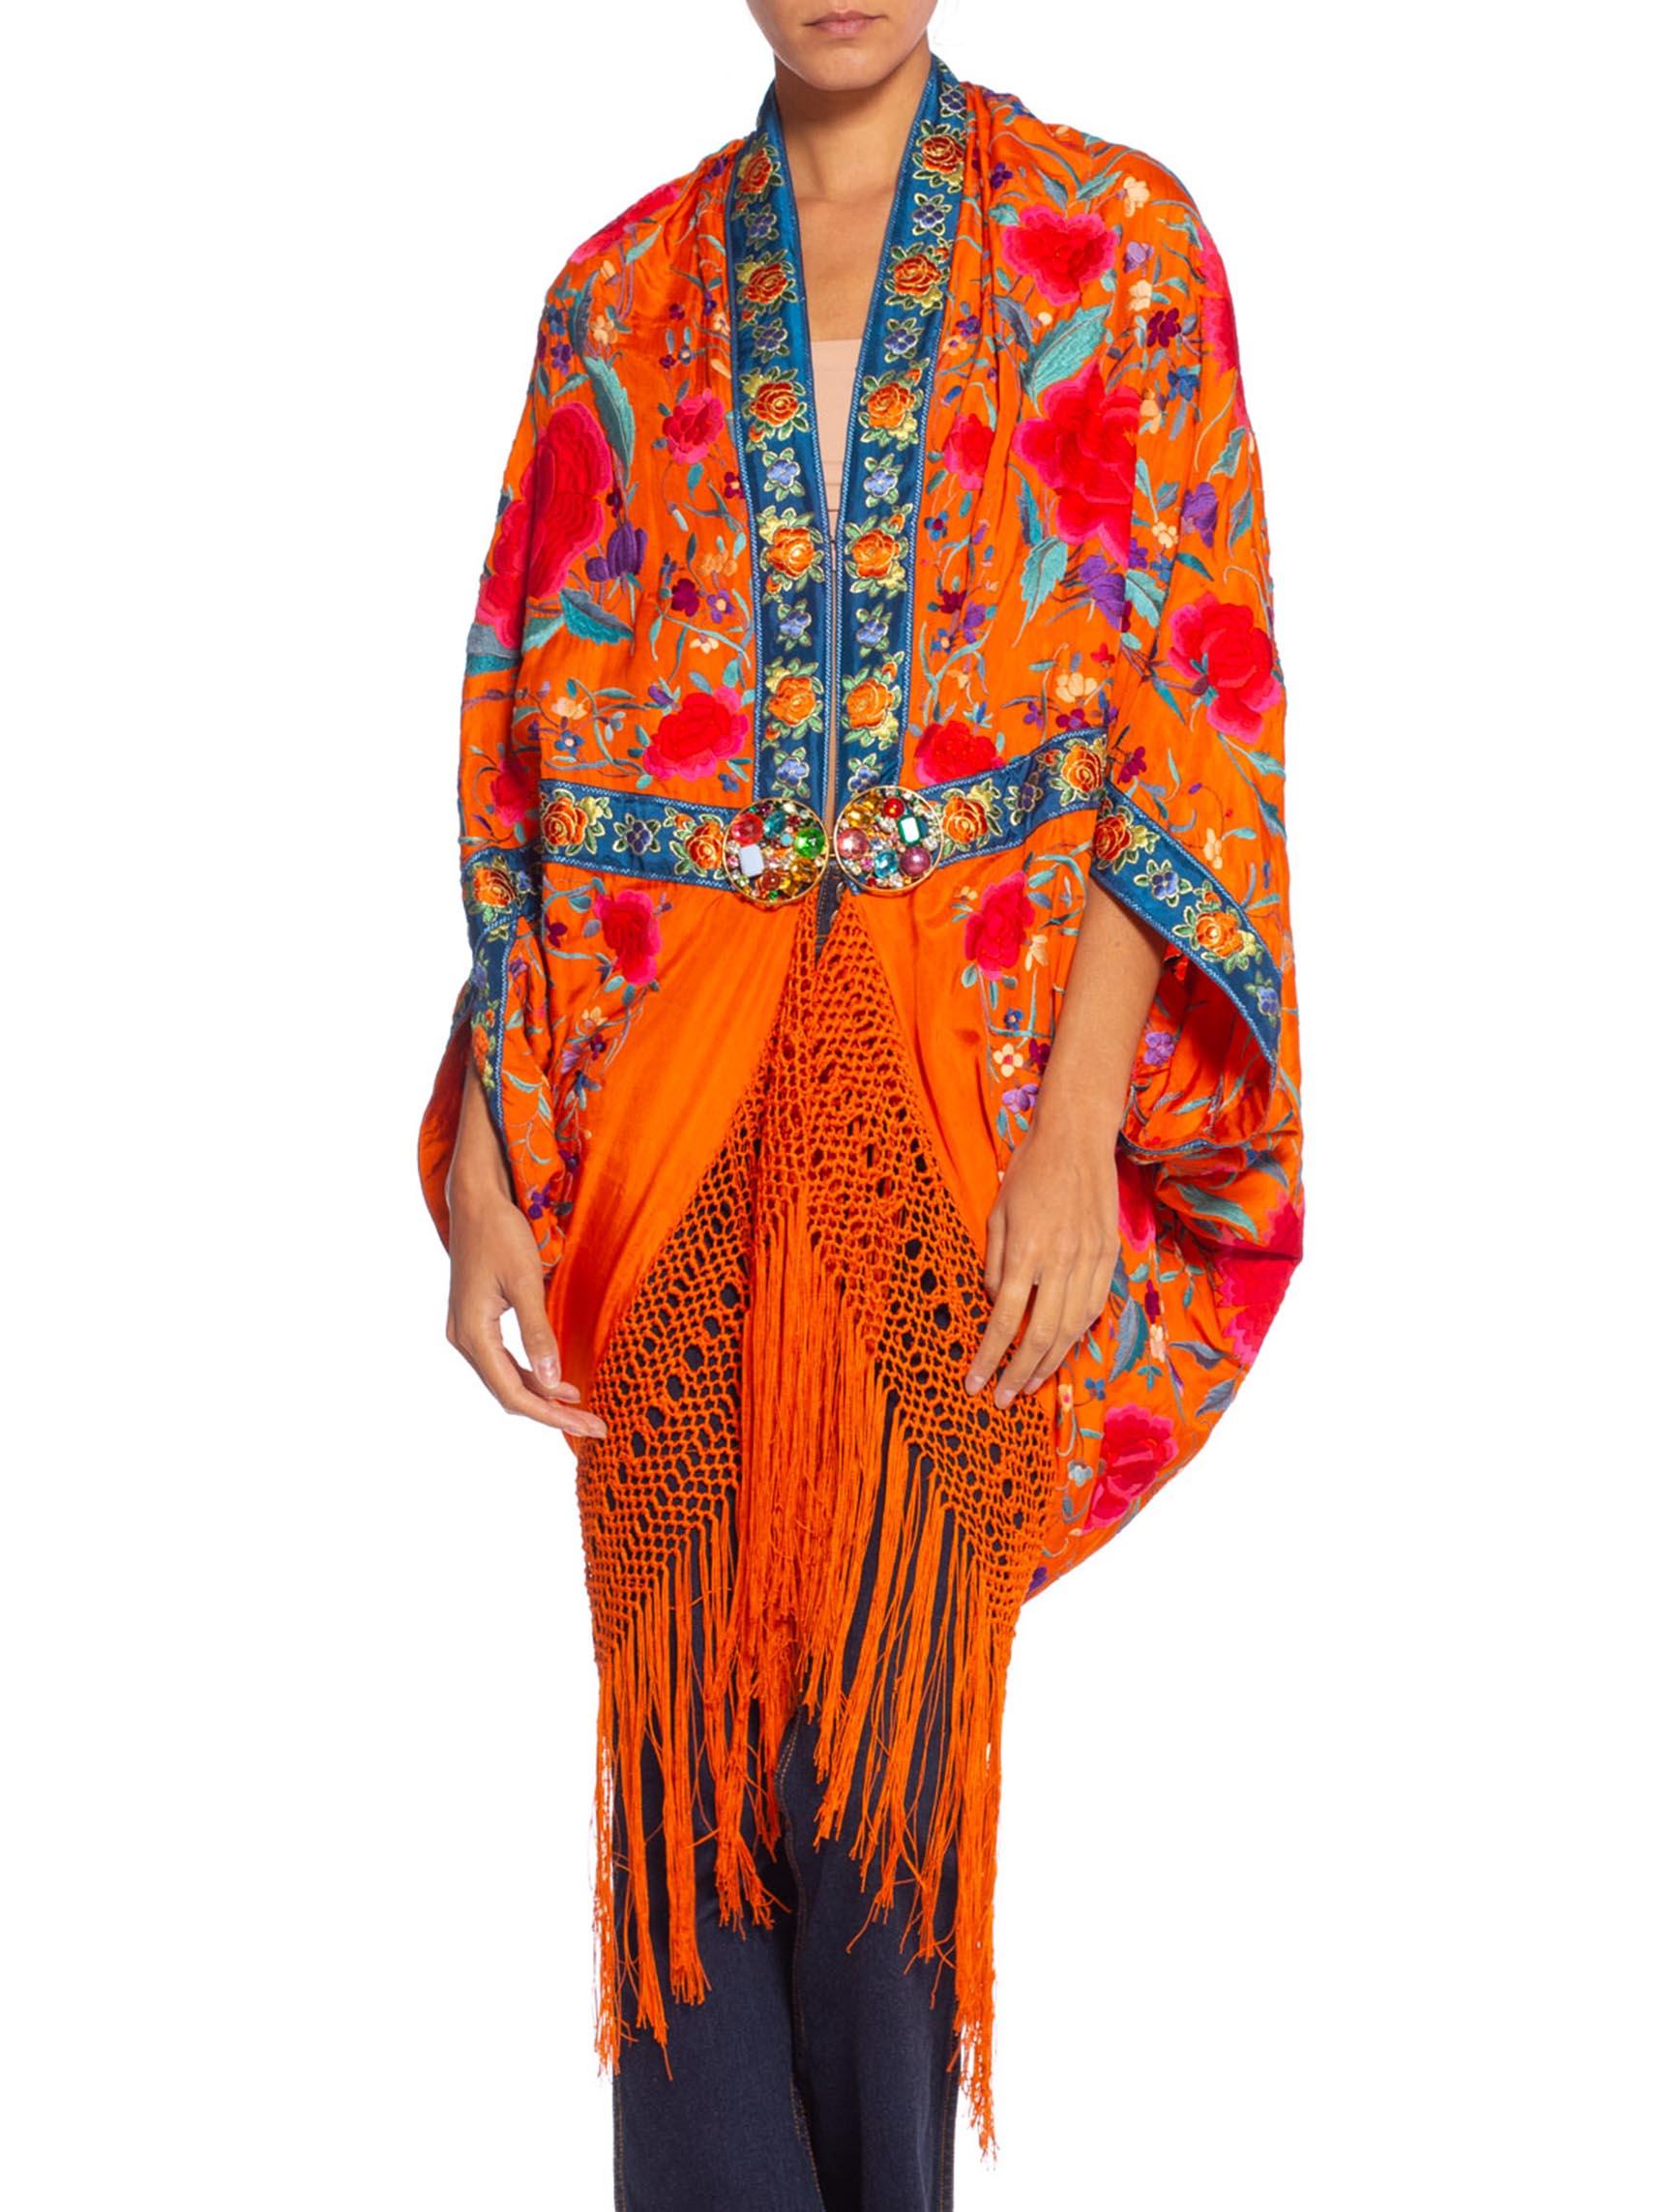 MORPHEW COLLECTION Orange Hand Embroidered Silk Piano Shawl Cocoon With Fringe & 1970'S Ribbon Trim